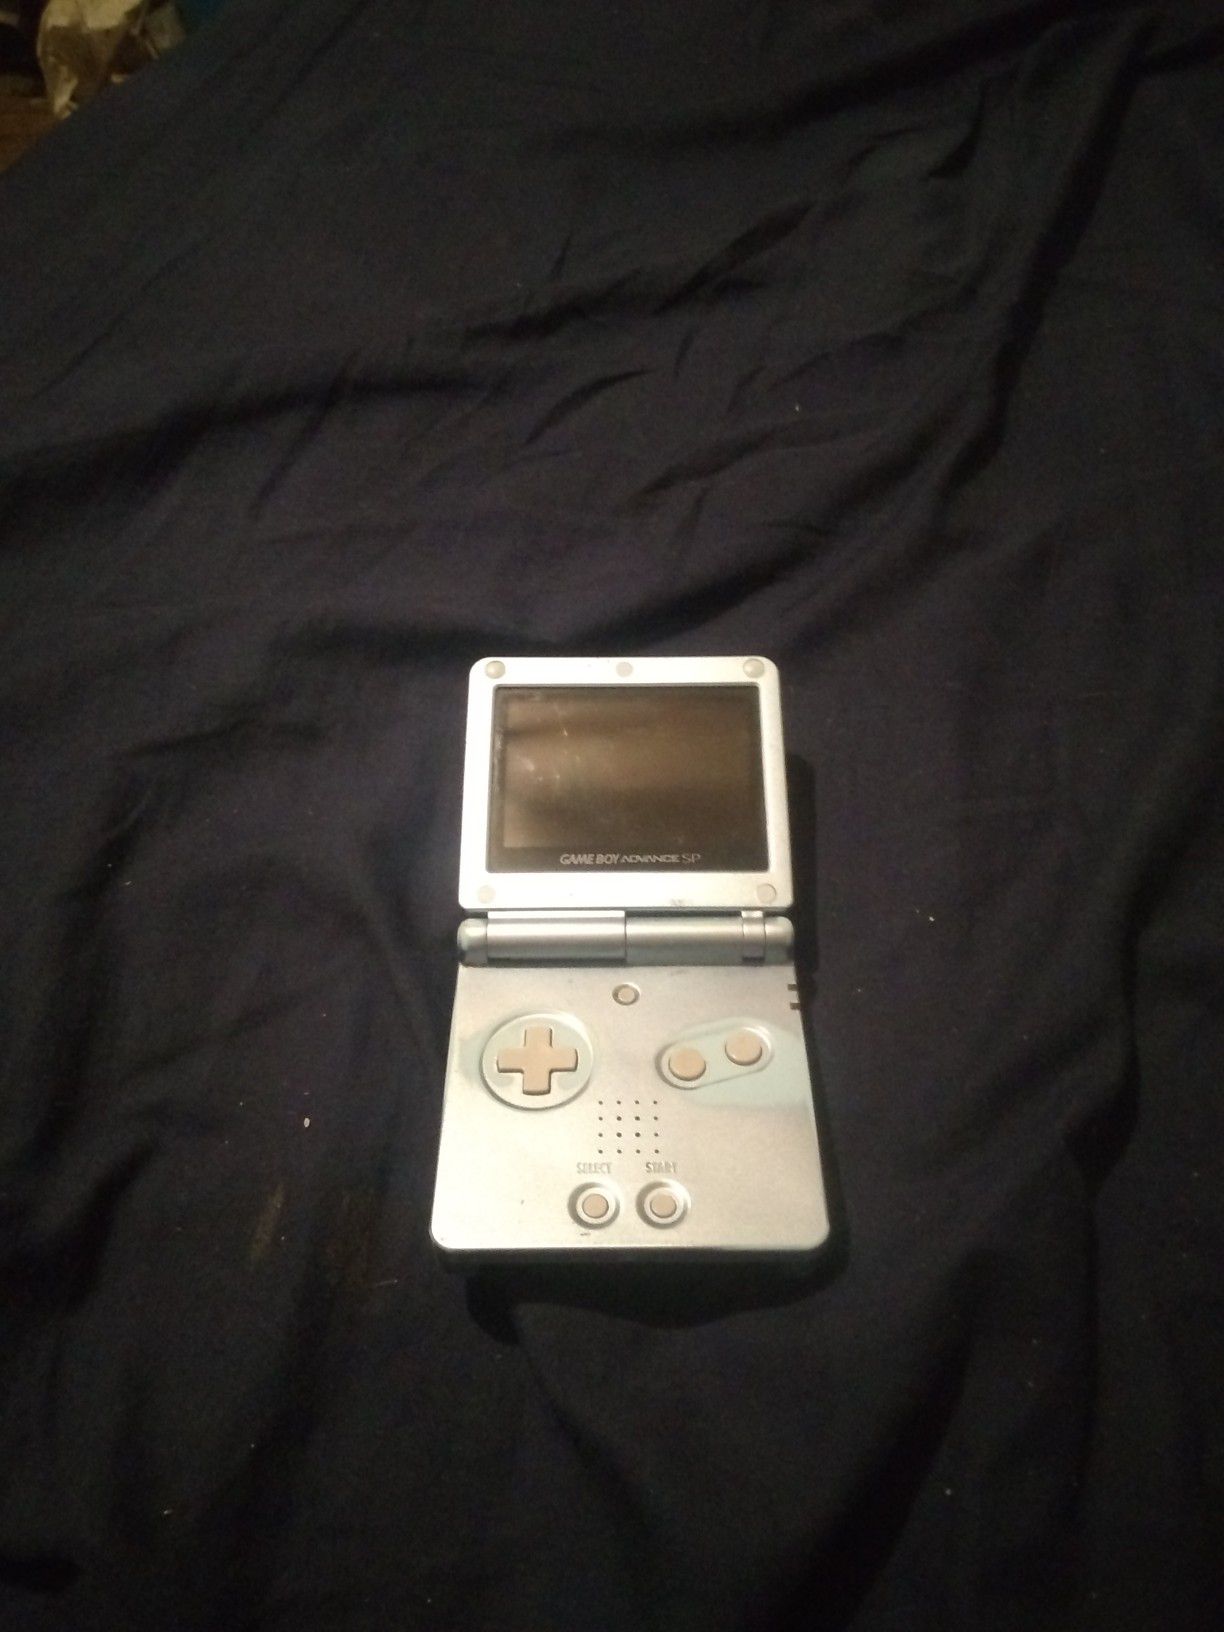 Nintendo Gameboy advance its dead has no charger comes with super Mario 3 $10 sold as is